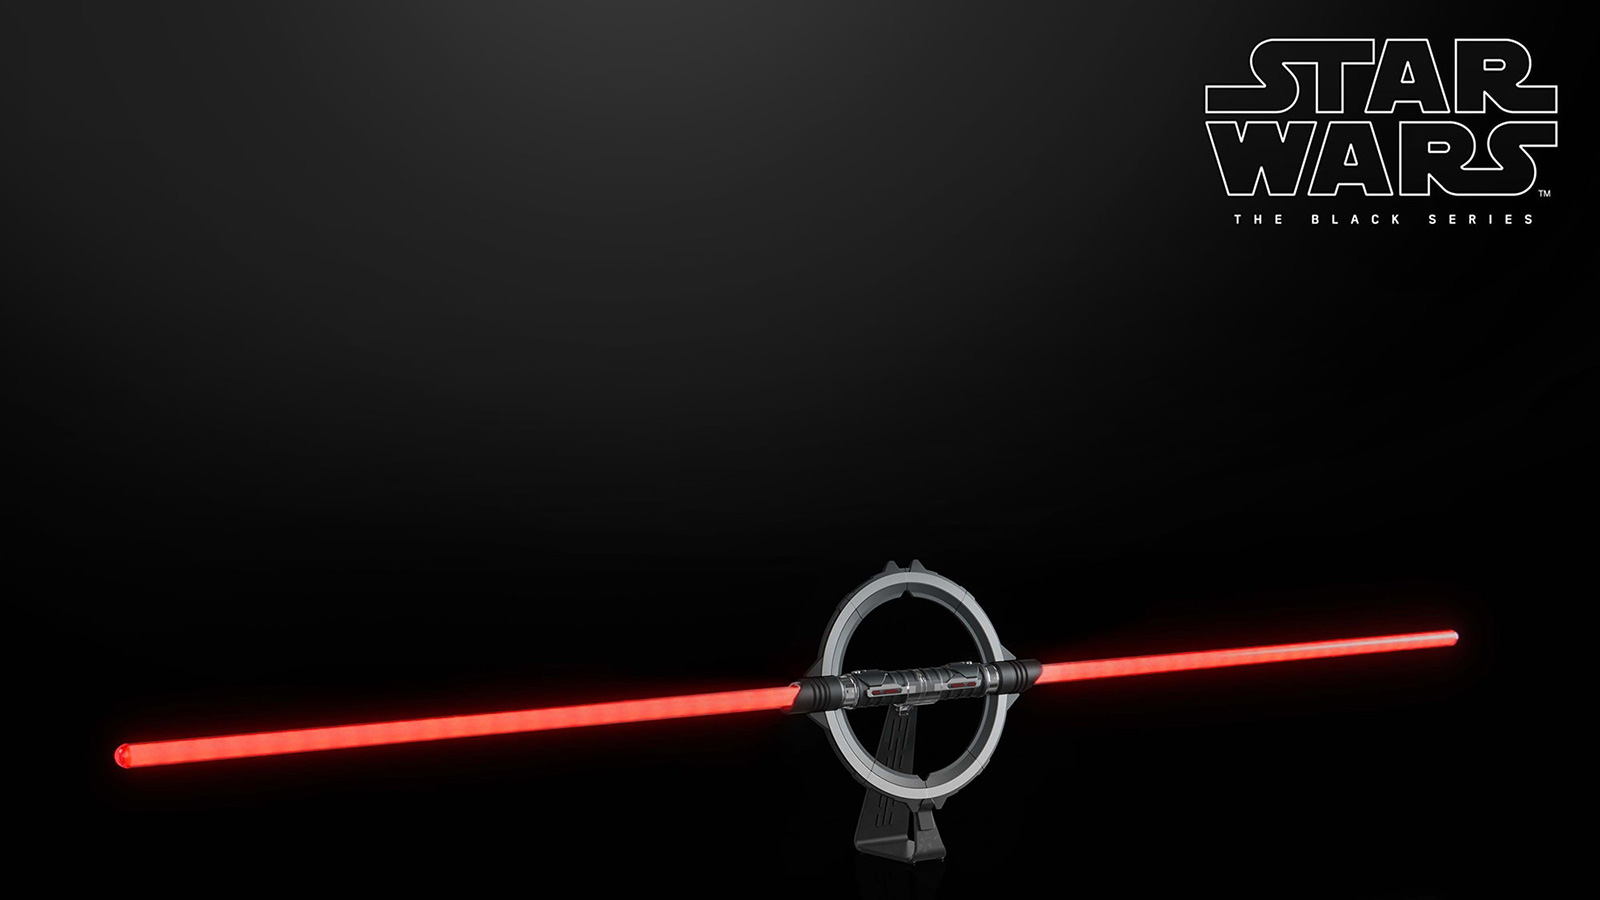 Will HasLab’s Star Wars The Black Series Reva (The Third Sister) Force FX Elite Lightsaber Get Funded?